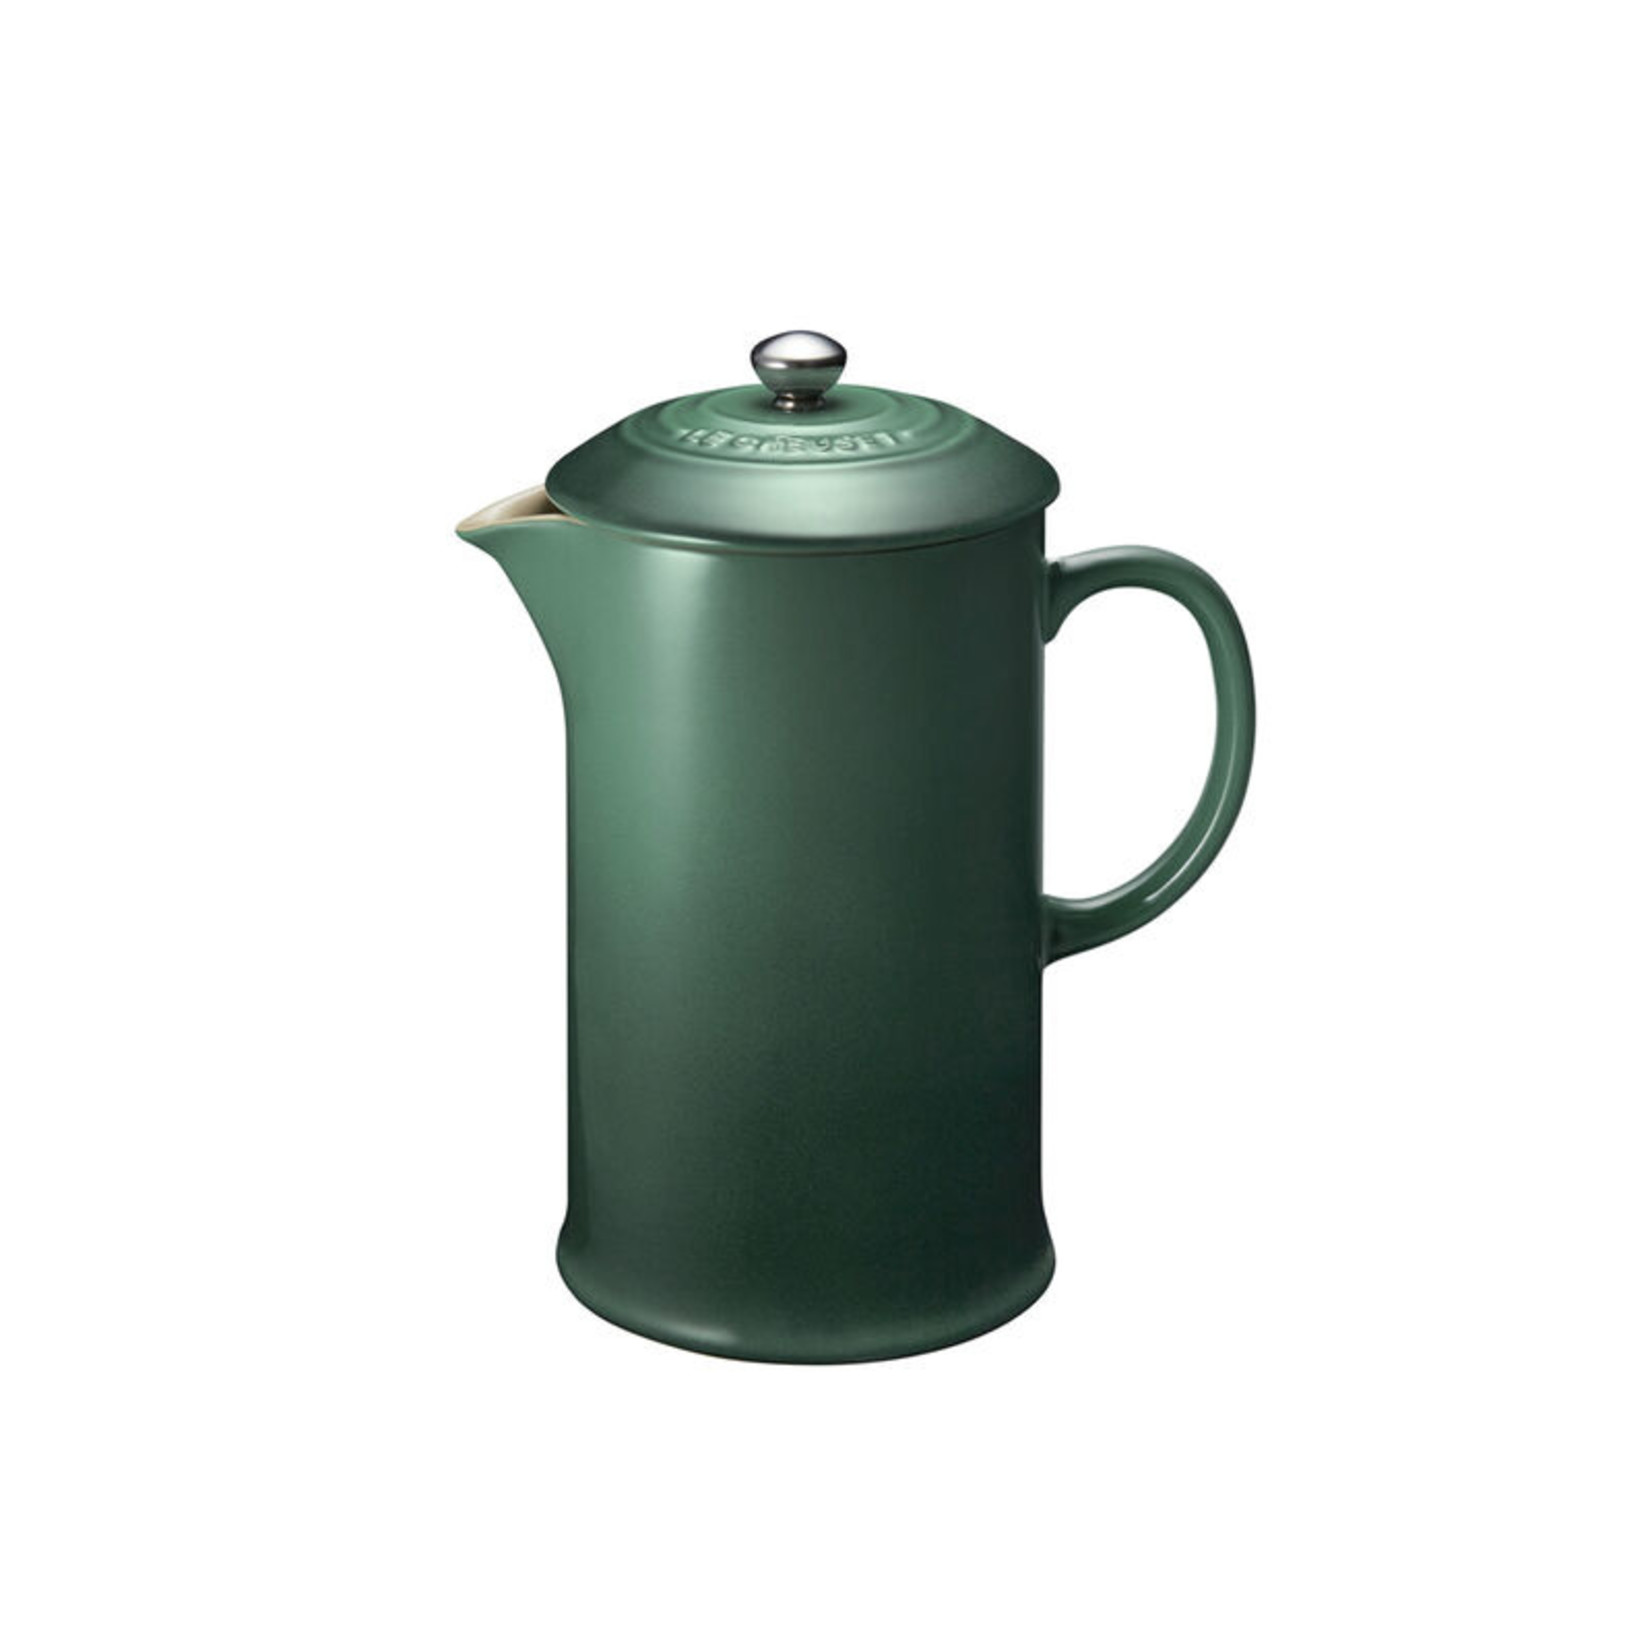 Le Creuset Classic French Press